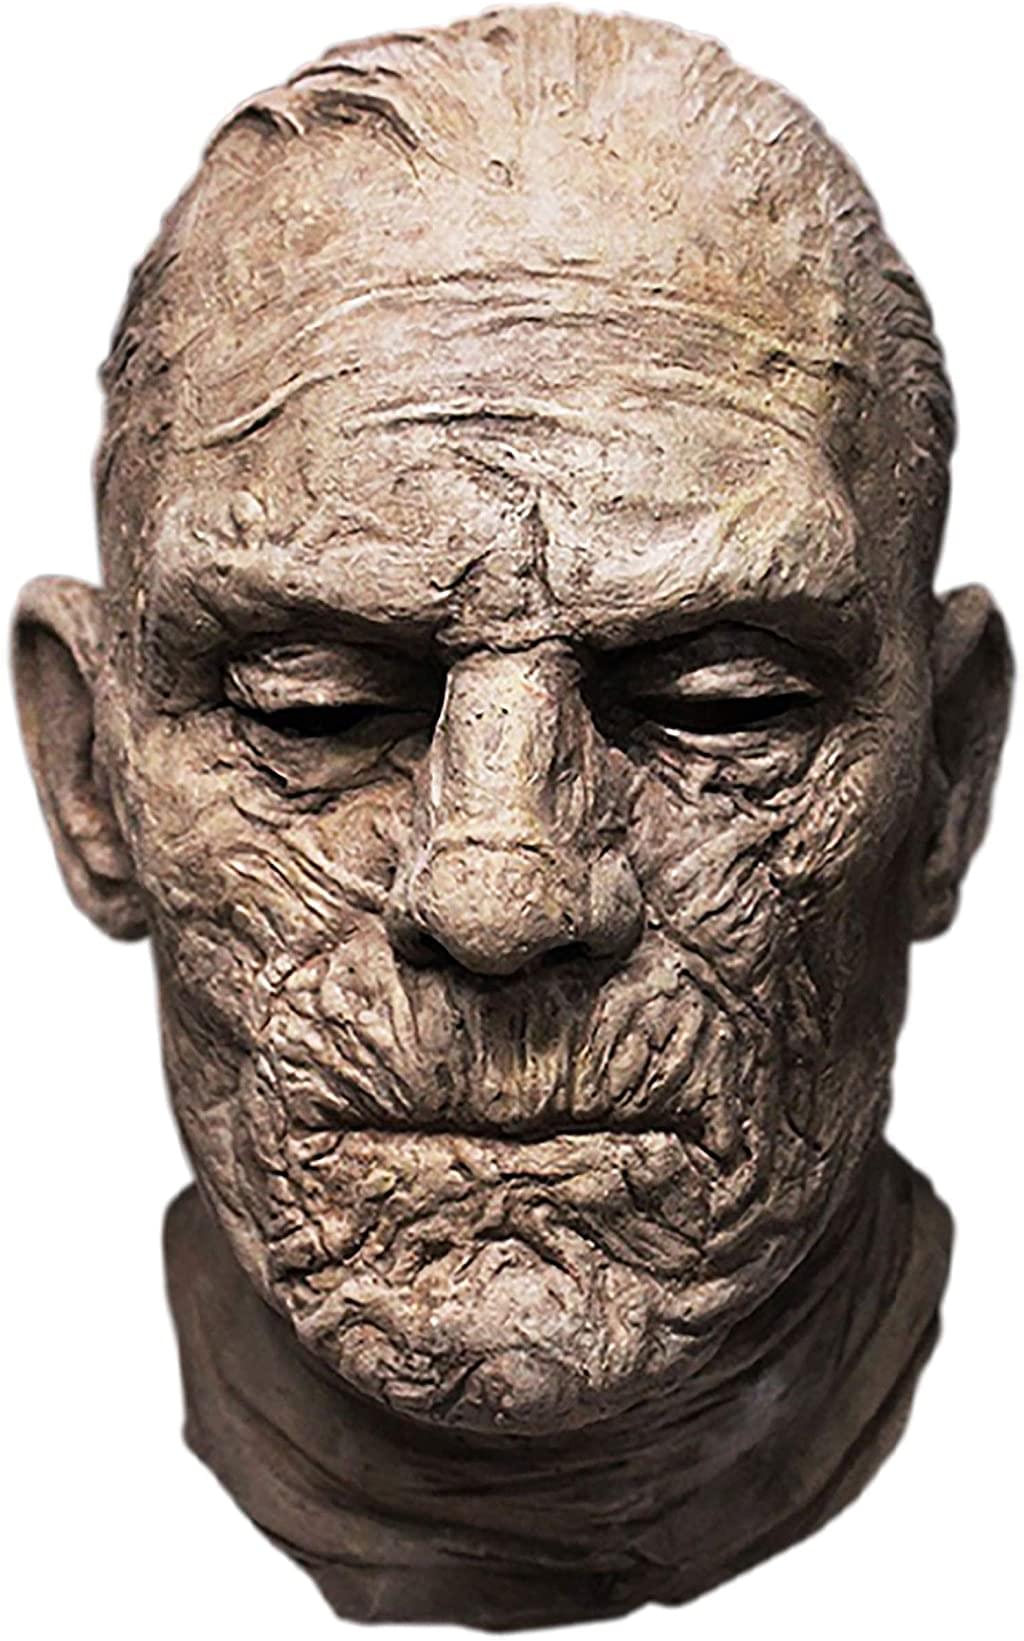 Universal Monsters Imhotep the Mummy Adult Latex Costume Mask